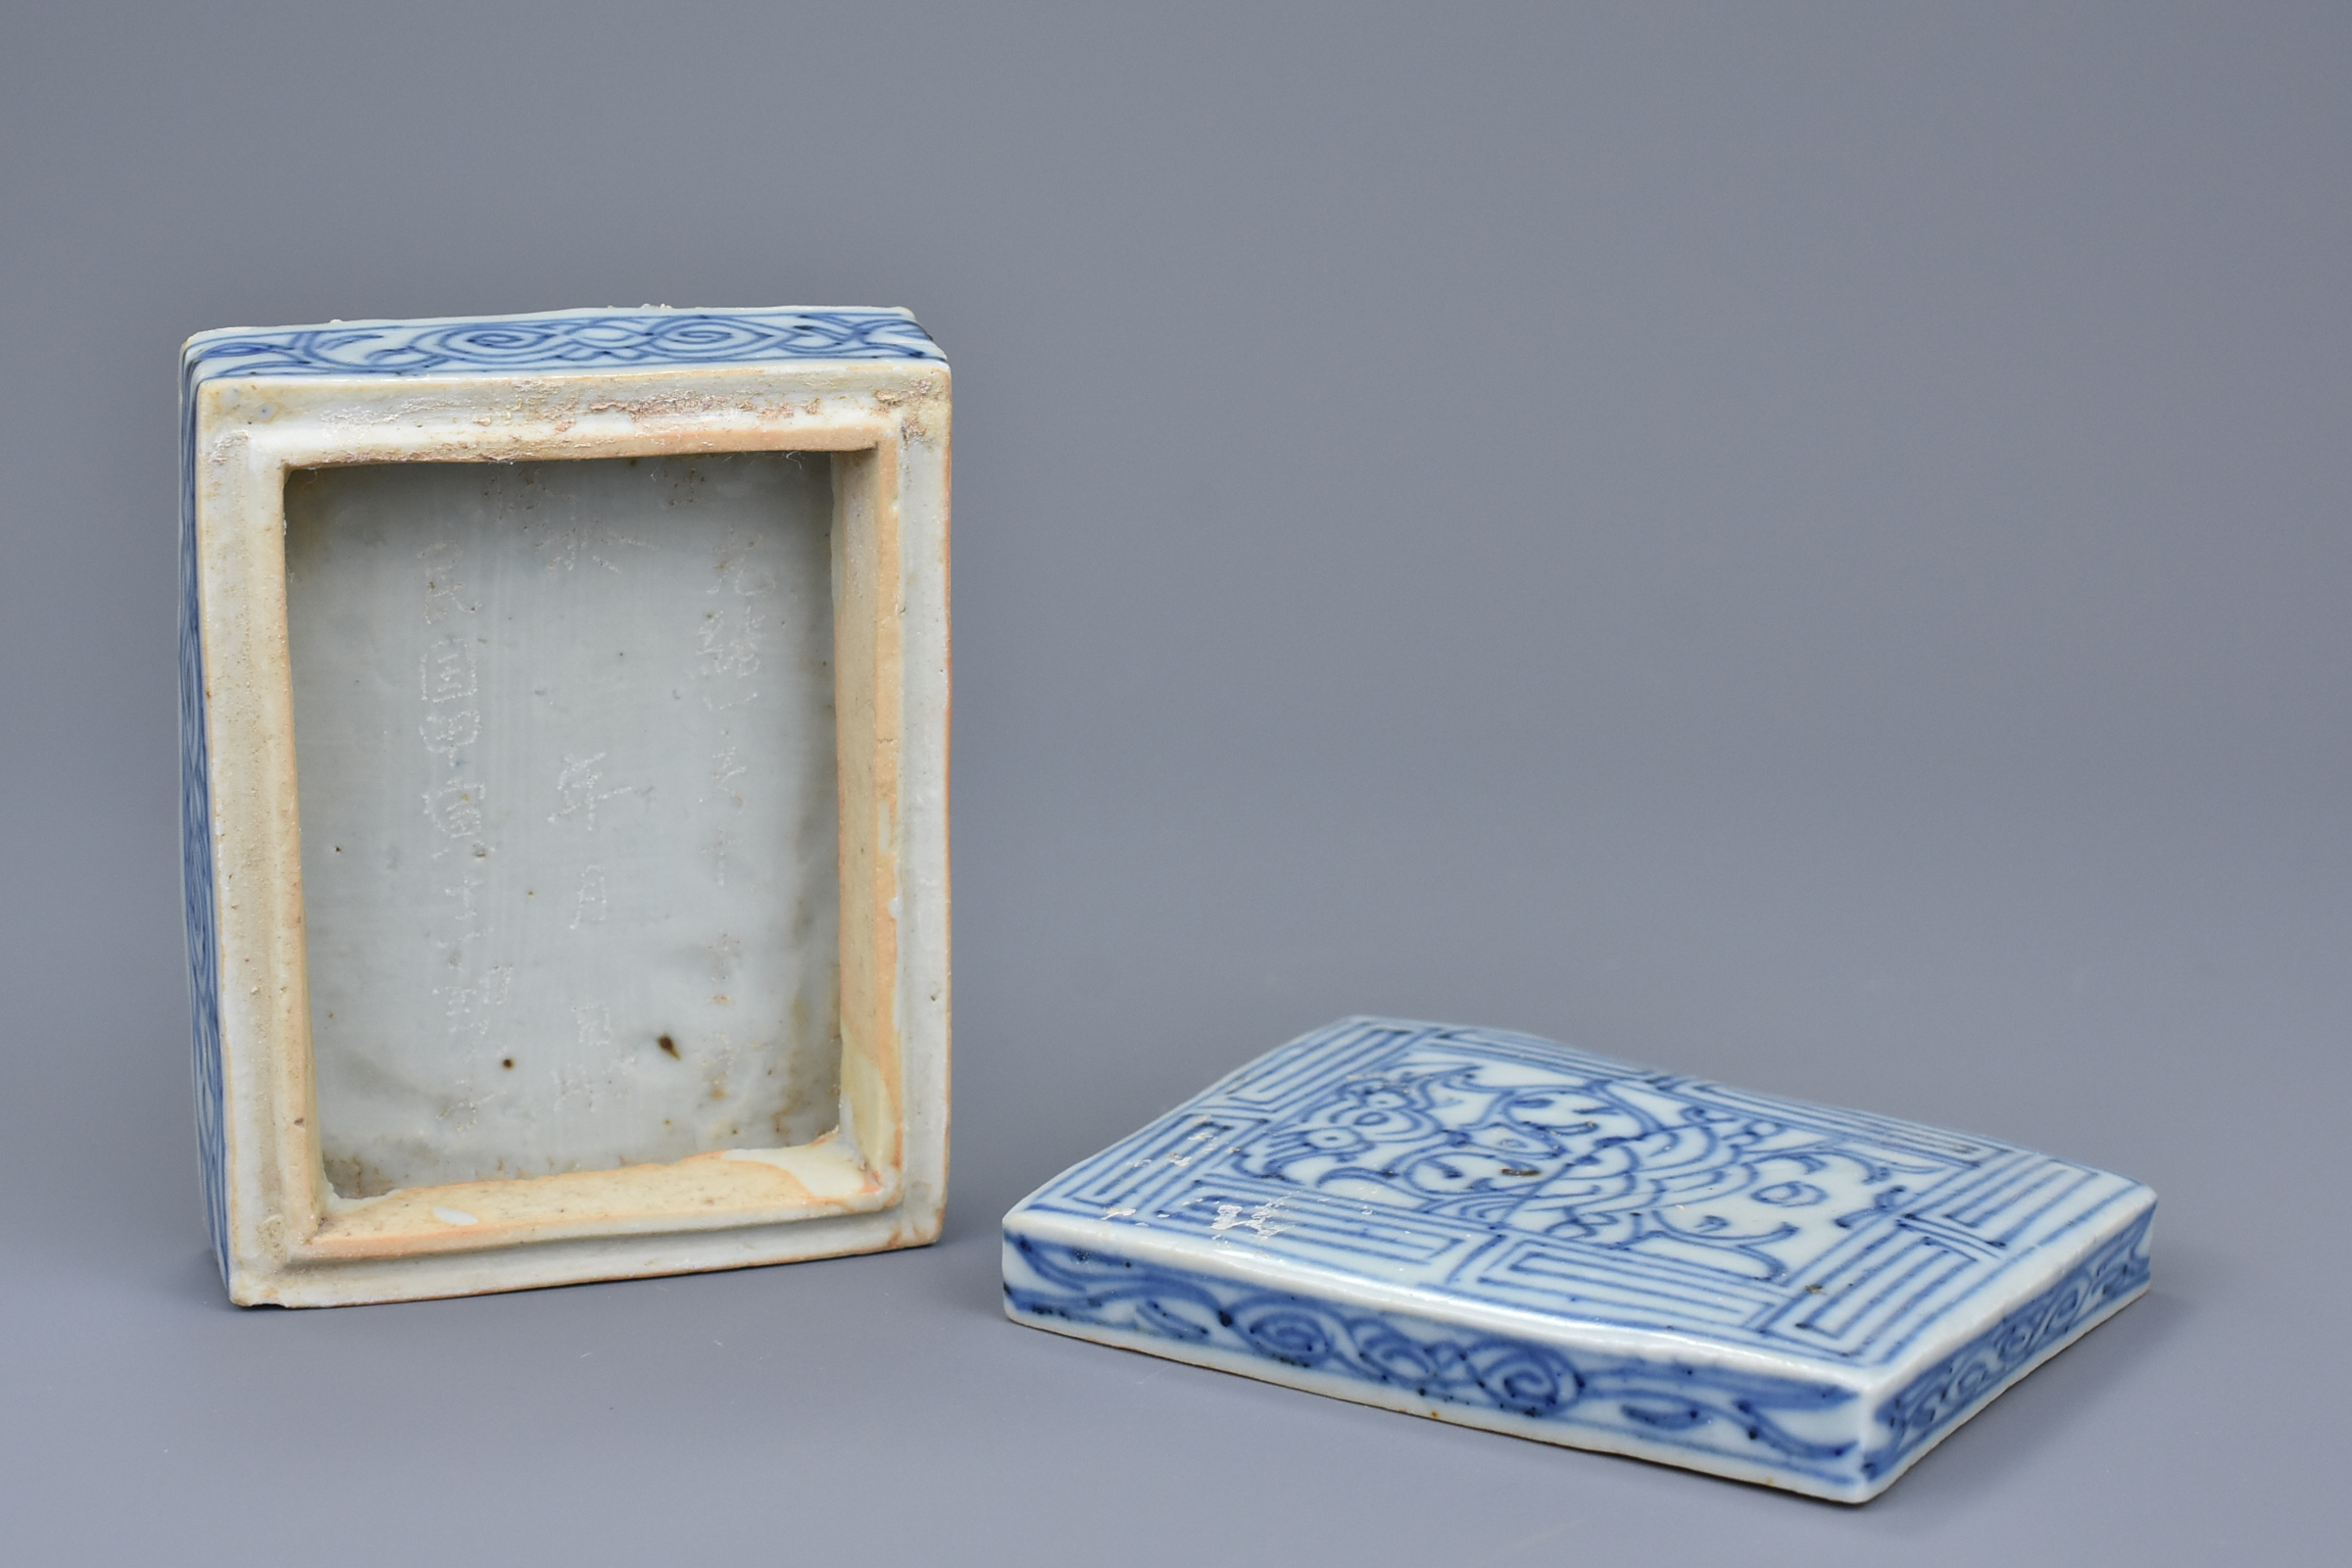 Two Chinese Blue & White Inscribed Porcelain Boxes – 19th / Early 20th Century - Image 5 of 8